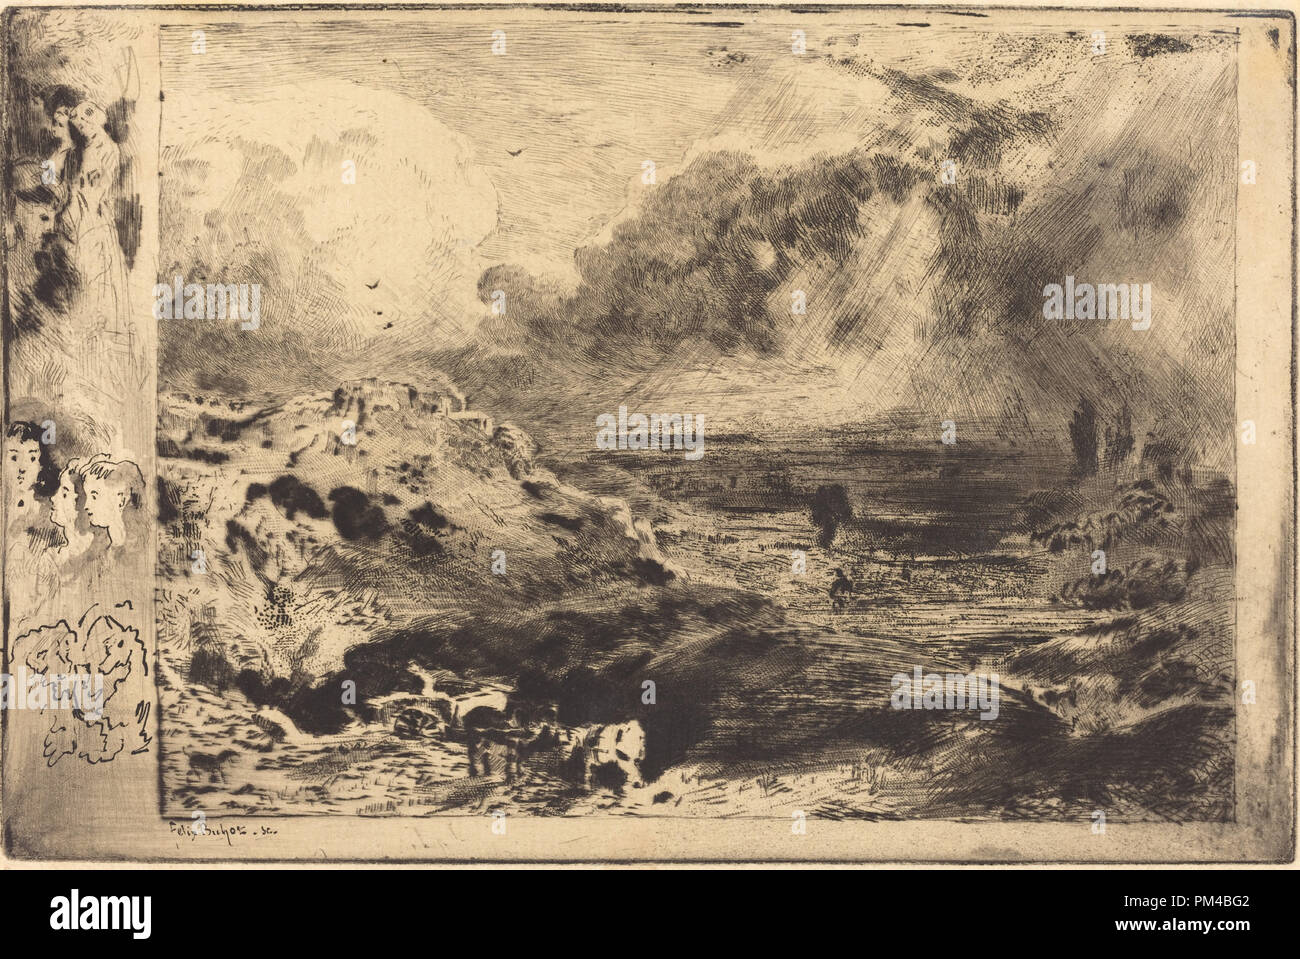 L'Orage (The Storm). Dated: 1879. Dimensions: plate: 14.9 x 22.6 cm (5 7/8 x 8 7/8 in.)  sheet: 16.4 x 23.9 cm (6 7/16 x 9 7/16 in.). Medium: drypoint and roulette with isolated areas of etching and possibly salt lift in black, touched in pen and black ink with gray wash, on moderately thick cream laid paper. Museum: National Gallery of Art, Washington DC. Author: Félix-Hilaire Buhot. Stock Photo